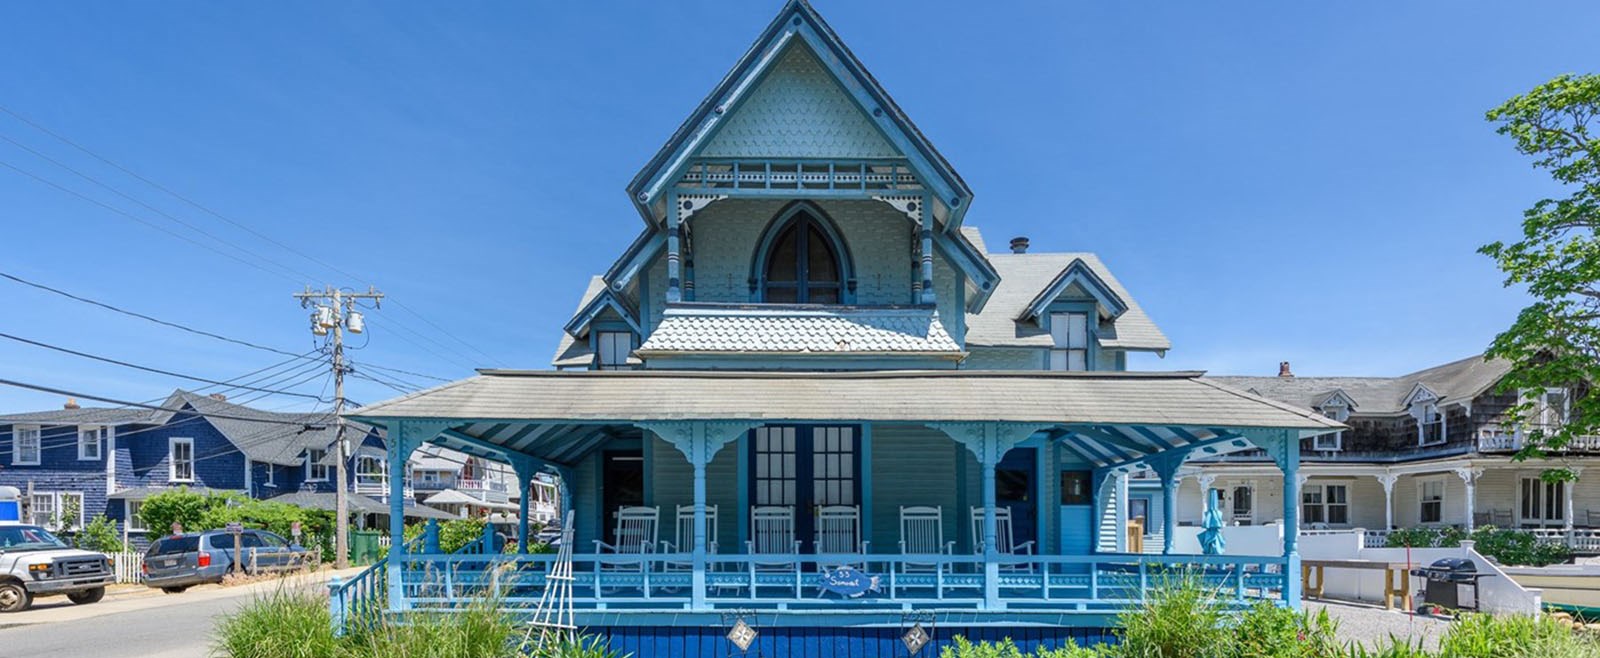 The “gingerbread cottages” of Oak Bluffs are not only colorful and cheery, they have a bit of history as well.